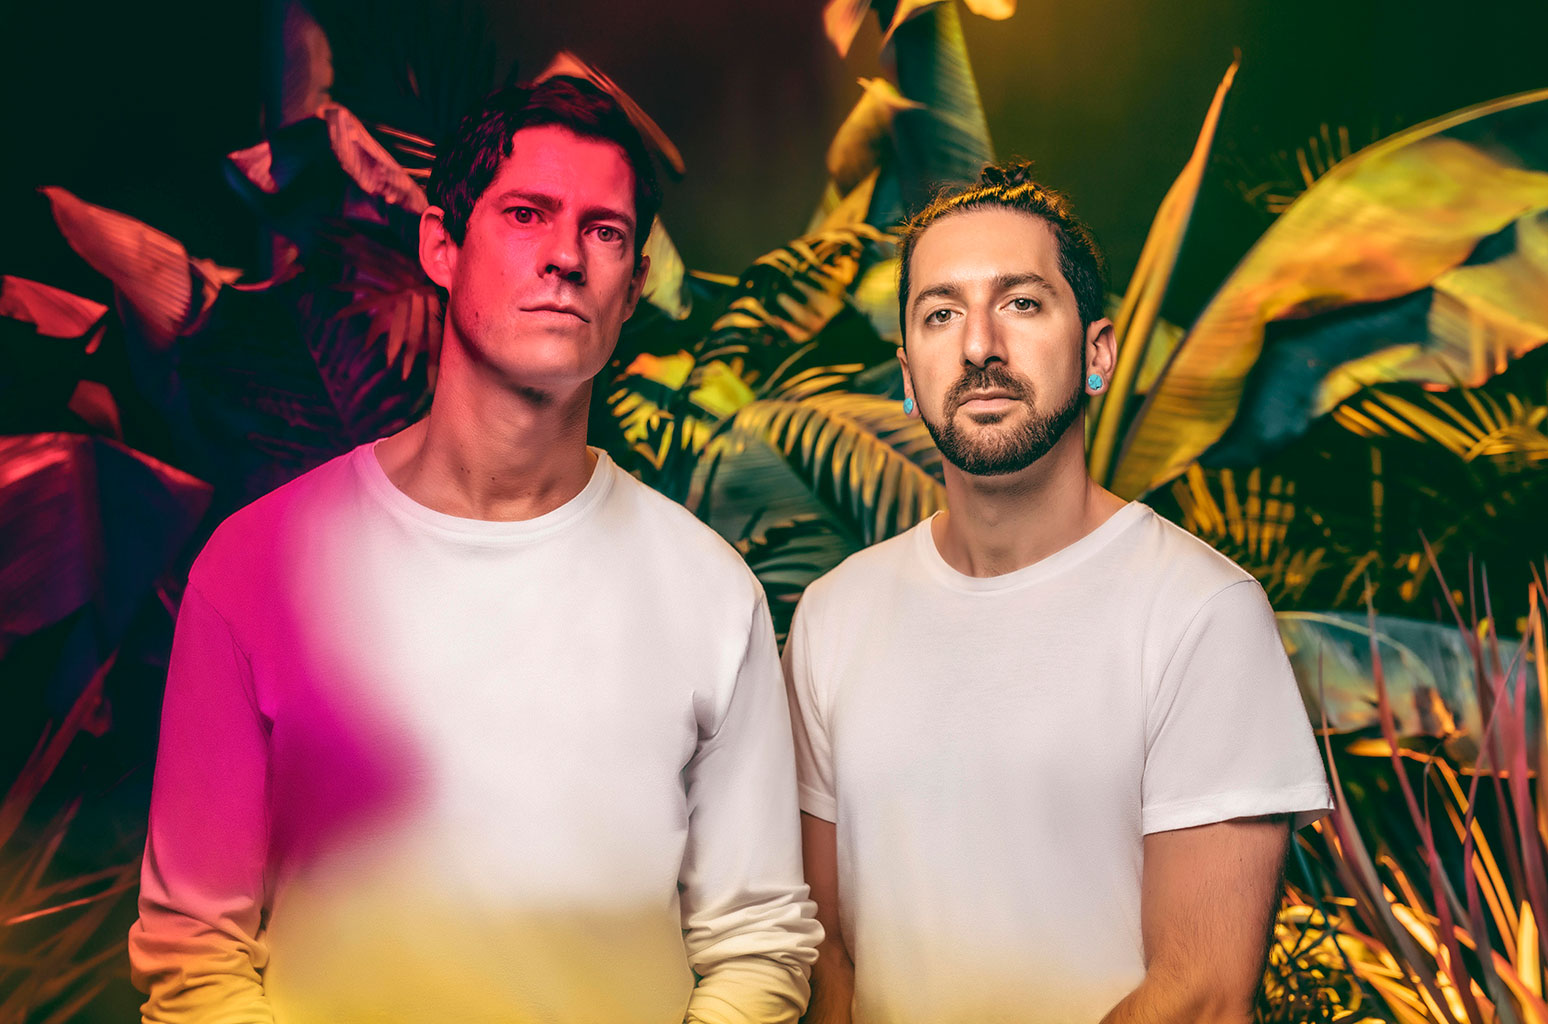 Free Your Mind with Big Gigantic!